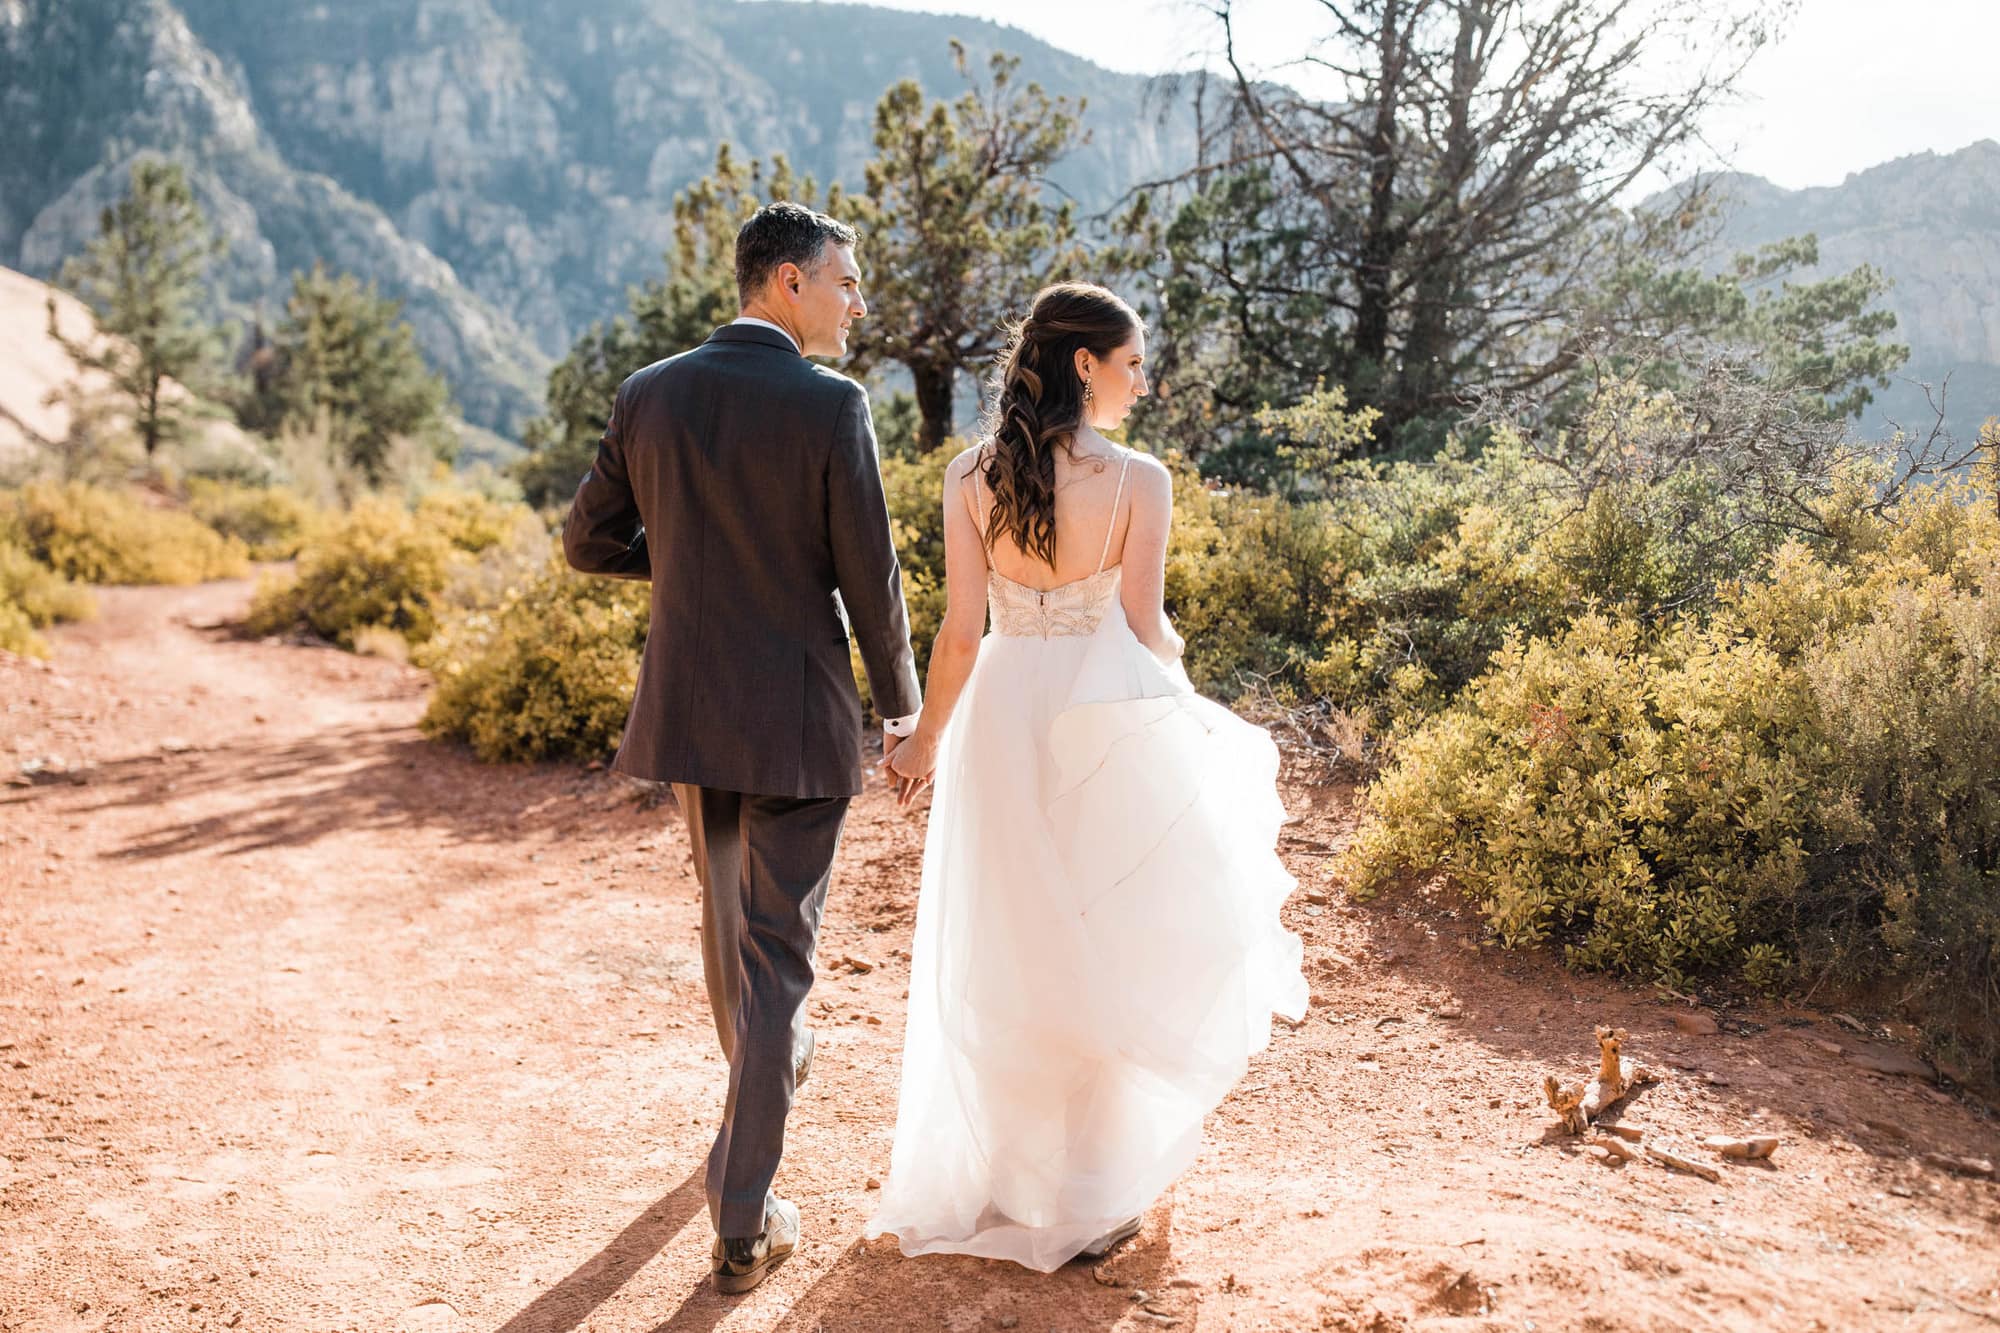 If you want to elope in Sedona, this Sedona elopement planning guide is for you. I share all the info you need to plan an epic day.